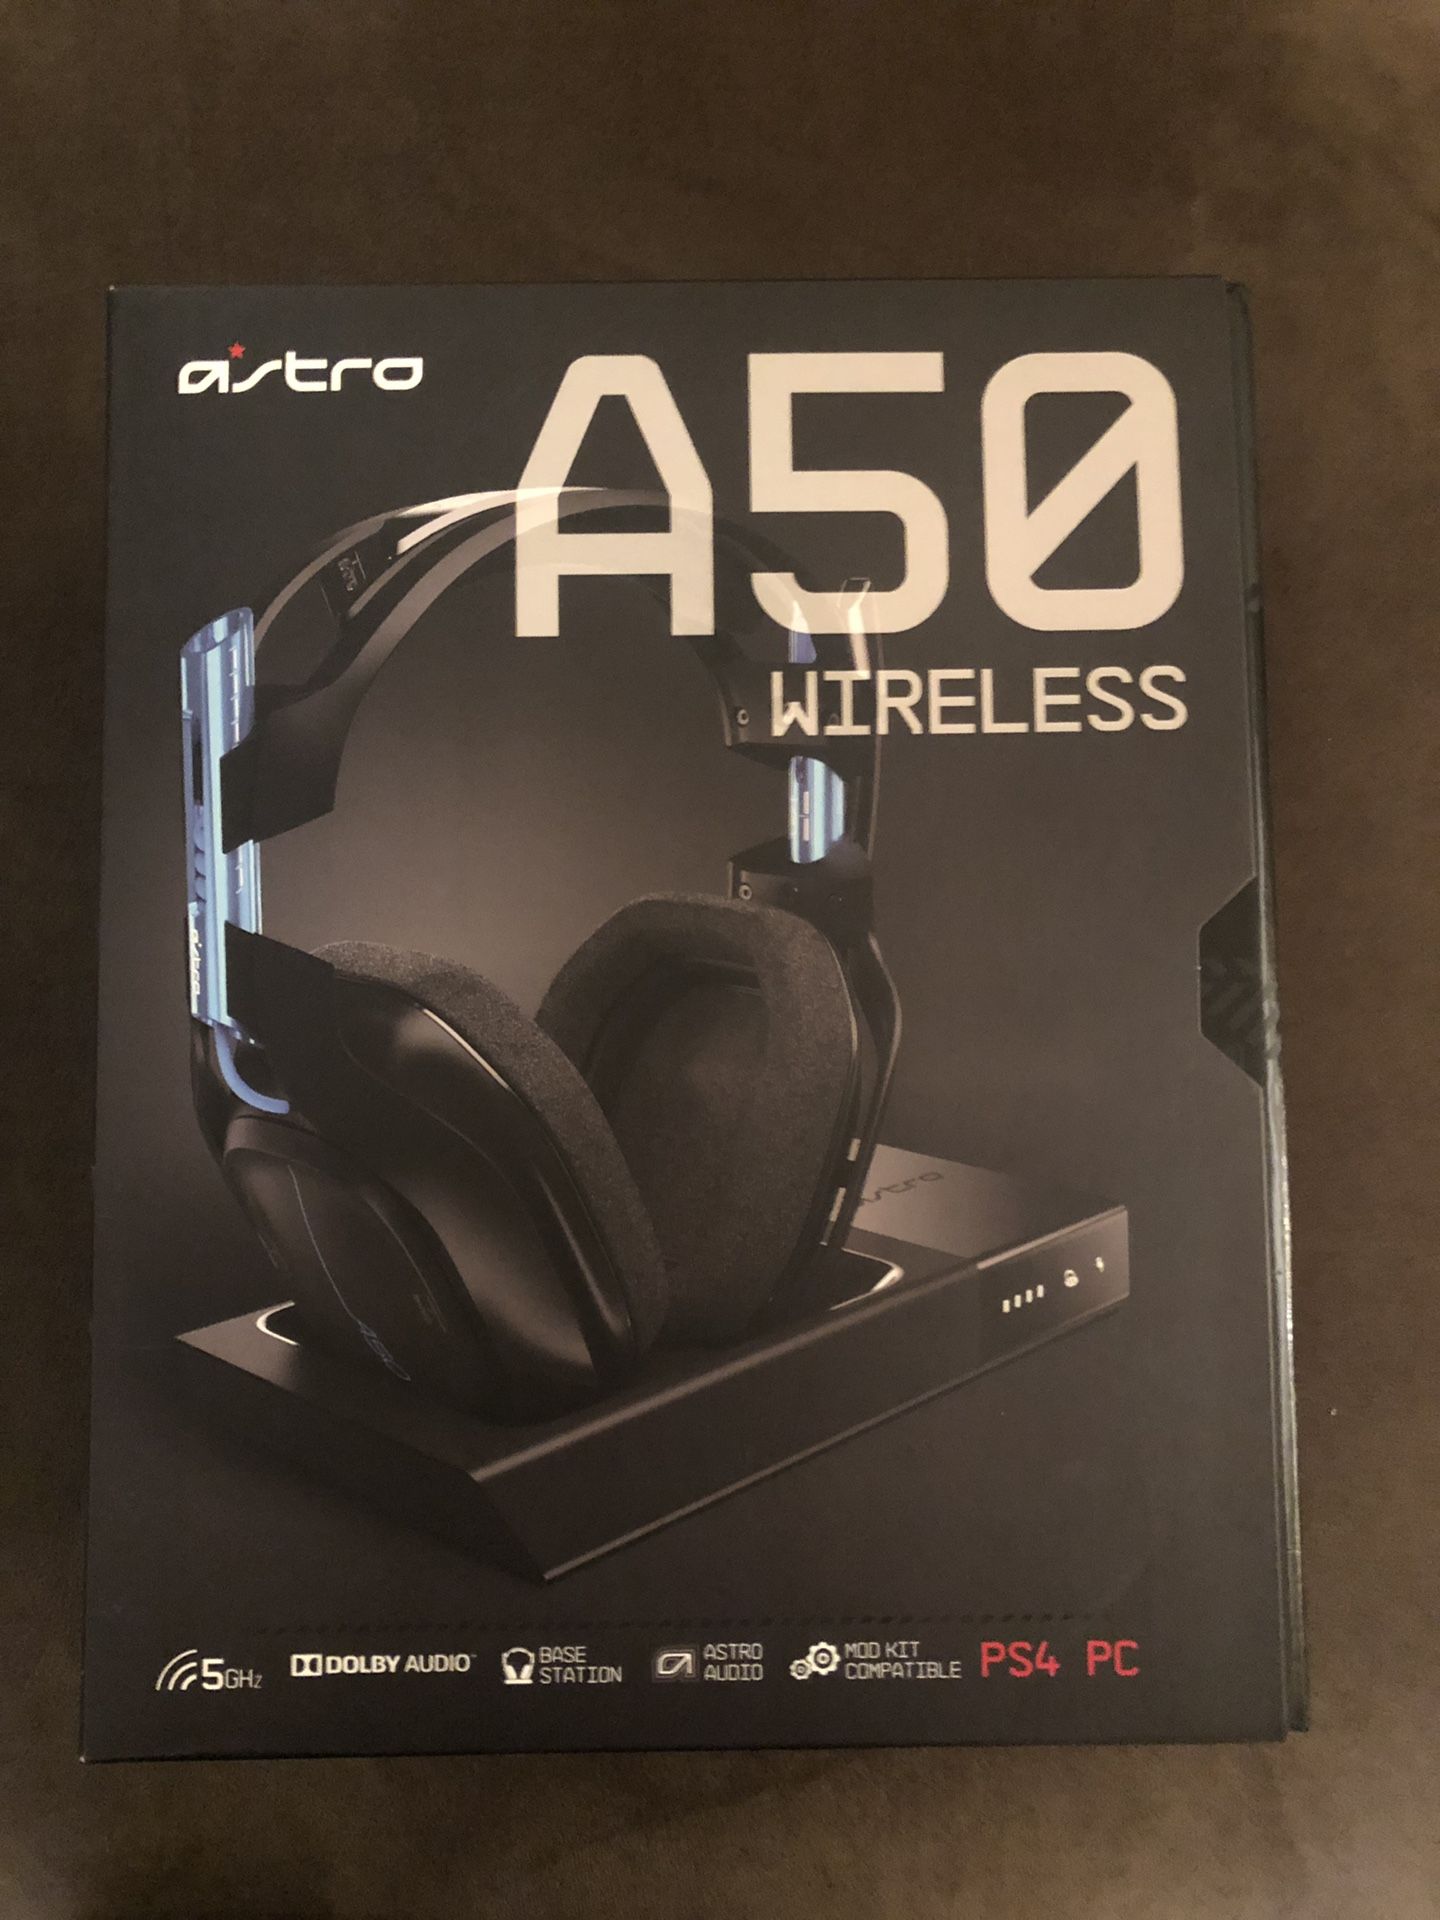 Headphones Astro a50 for ps4 and pc